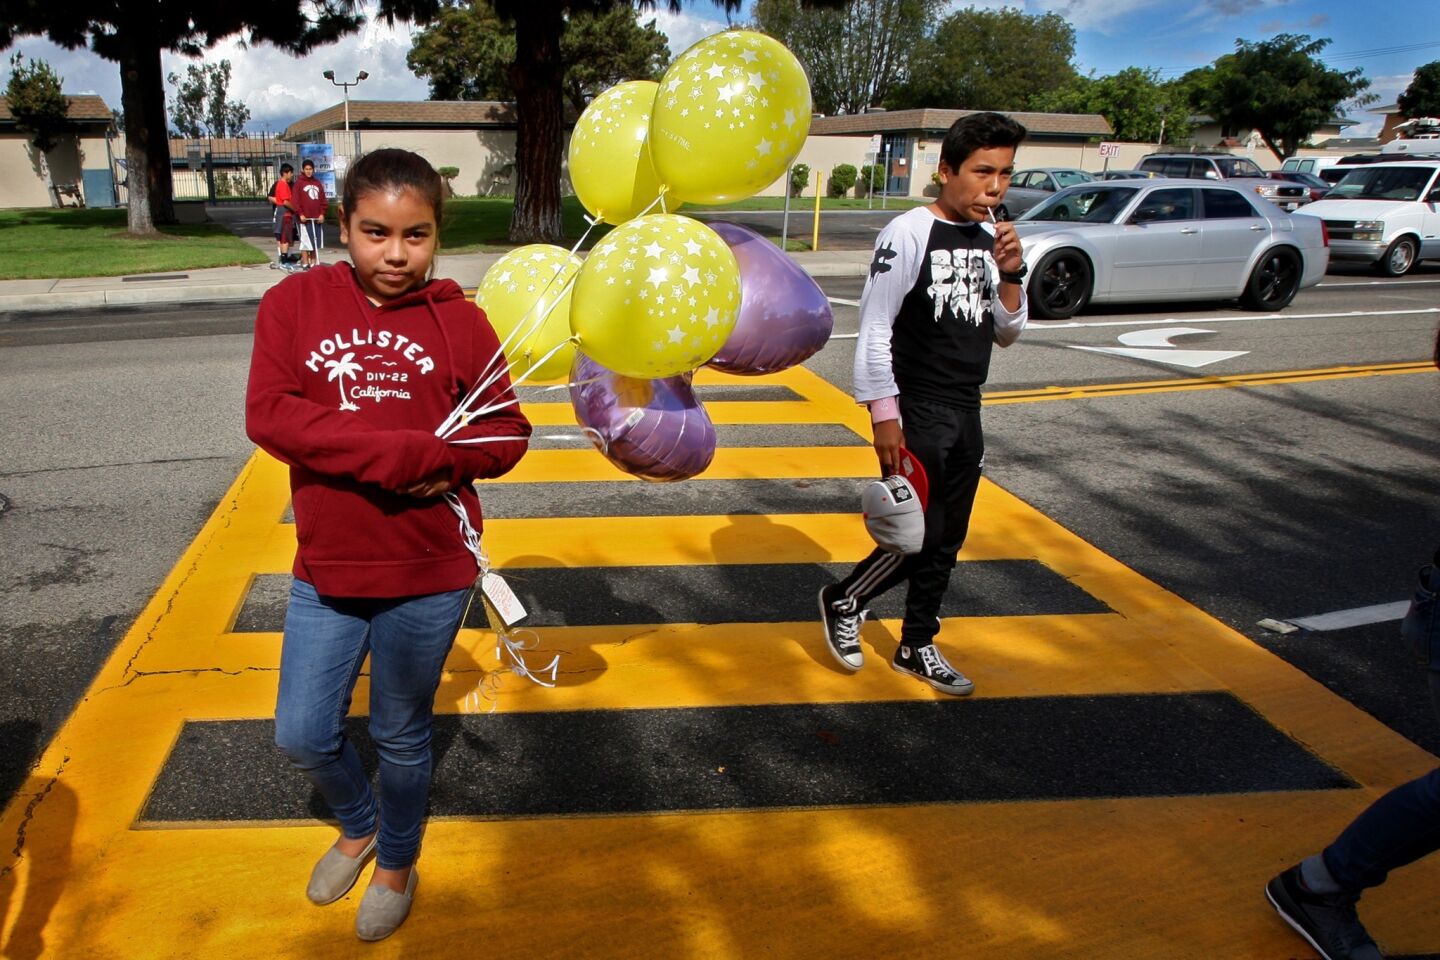 Leslie Corrales, 10, left, and her cousin bring balloons to a makeshift memorial where three 13-year-old girls, two of whom were twins, were killed by a hit-and-run driver Friday evening while they were trick-or-treating in Santa Ana.